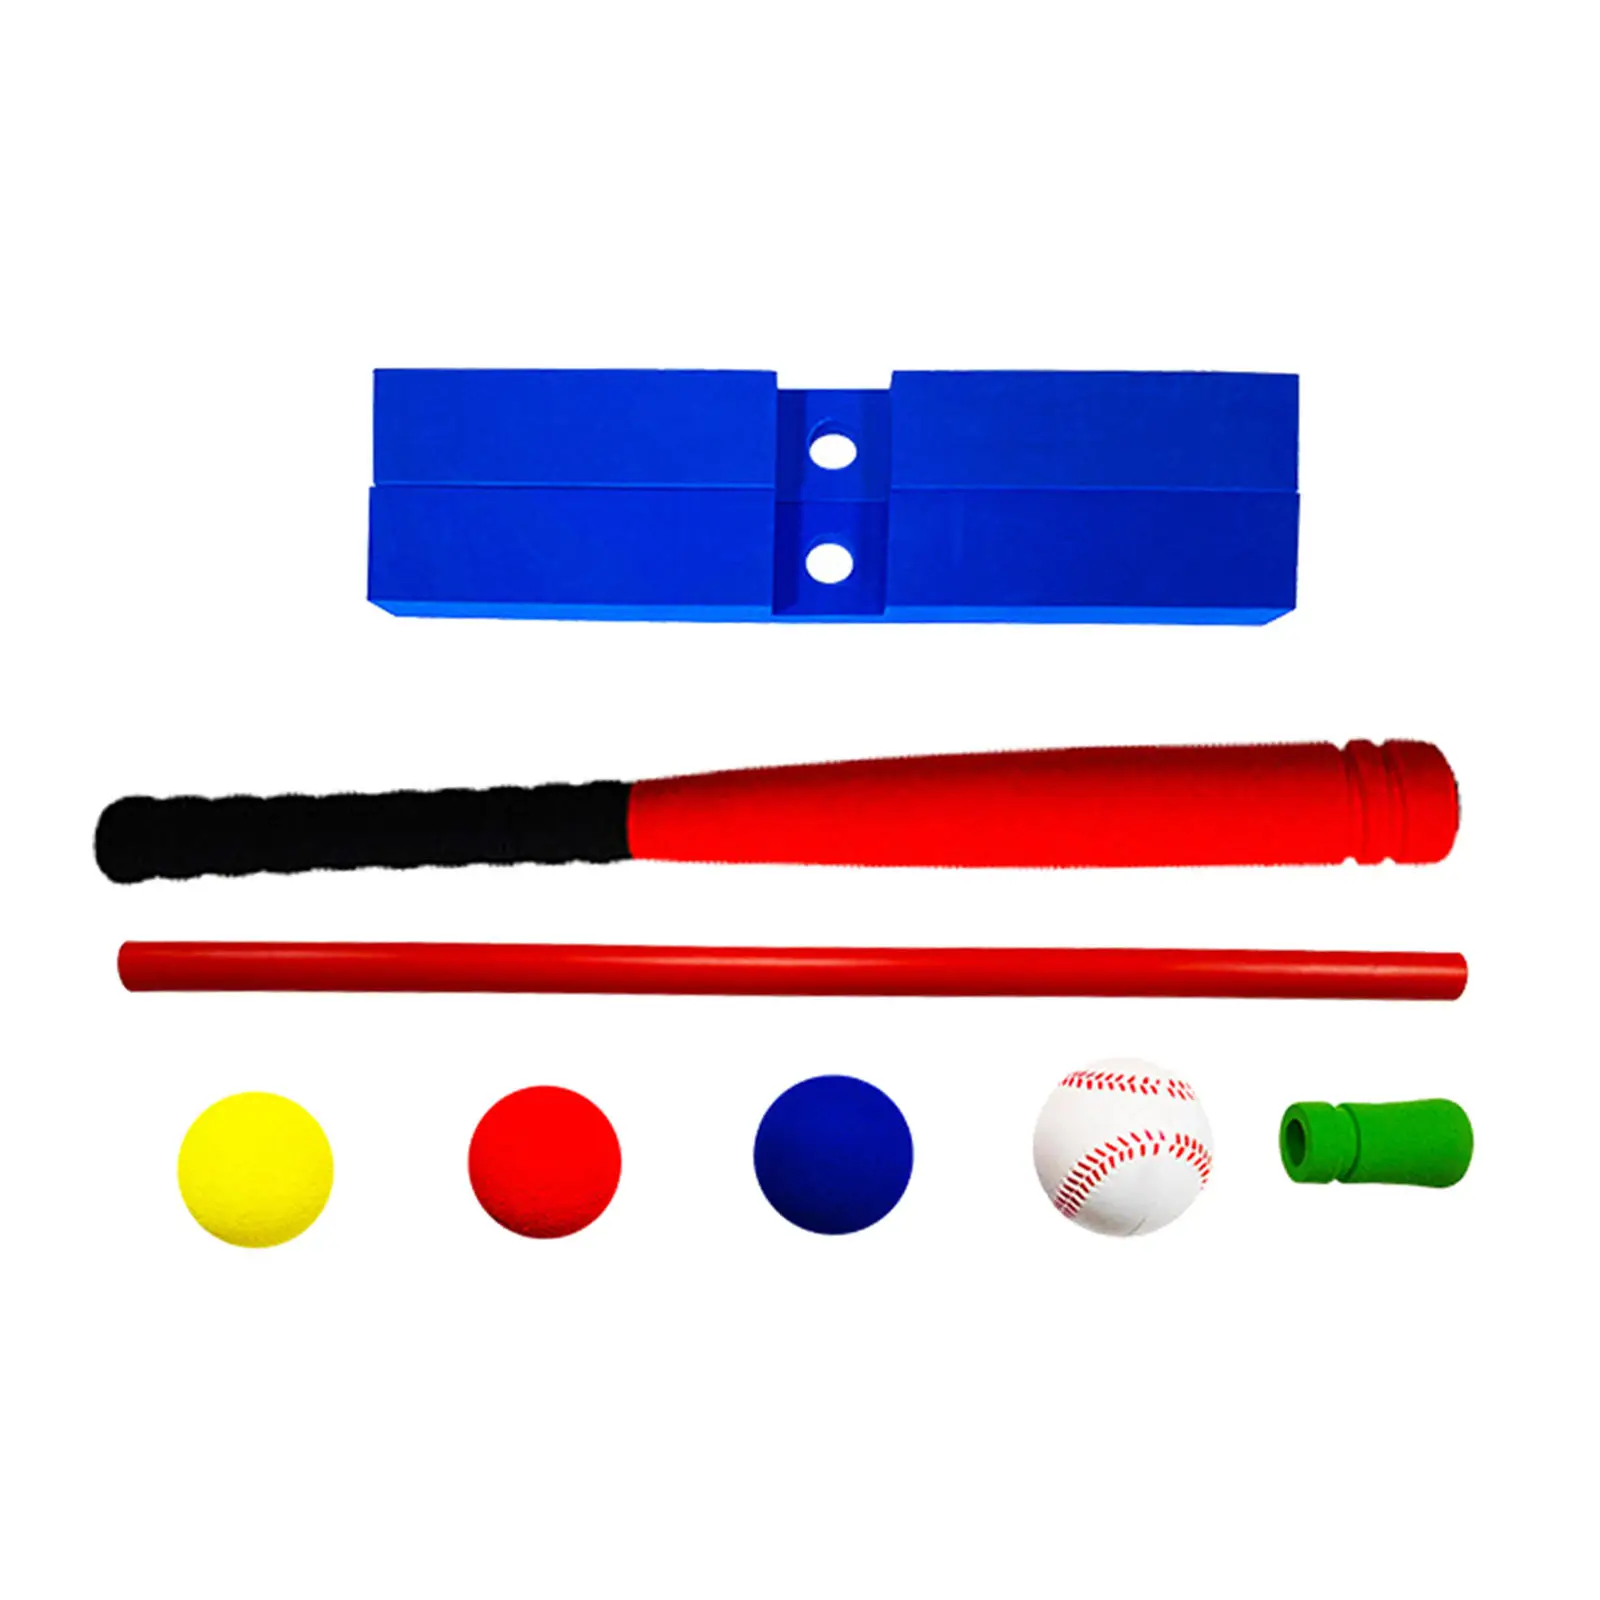 Educational Baseball Tee T-Ball Toy Soft Bat Safety Sports Play Game Indoor Outdoor Children Toddler